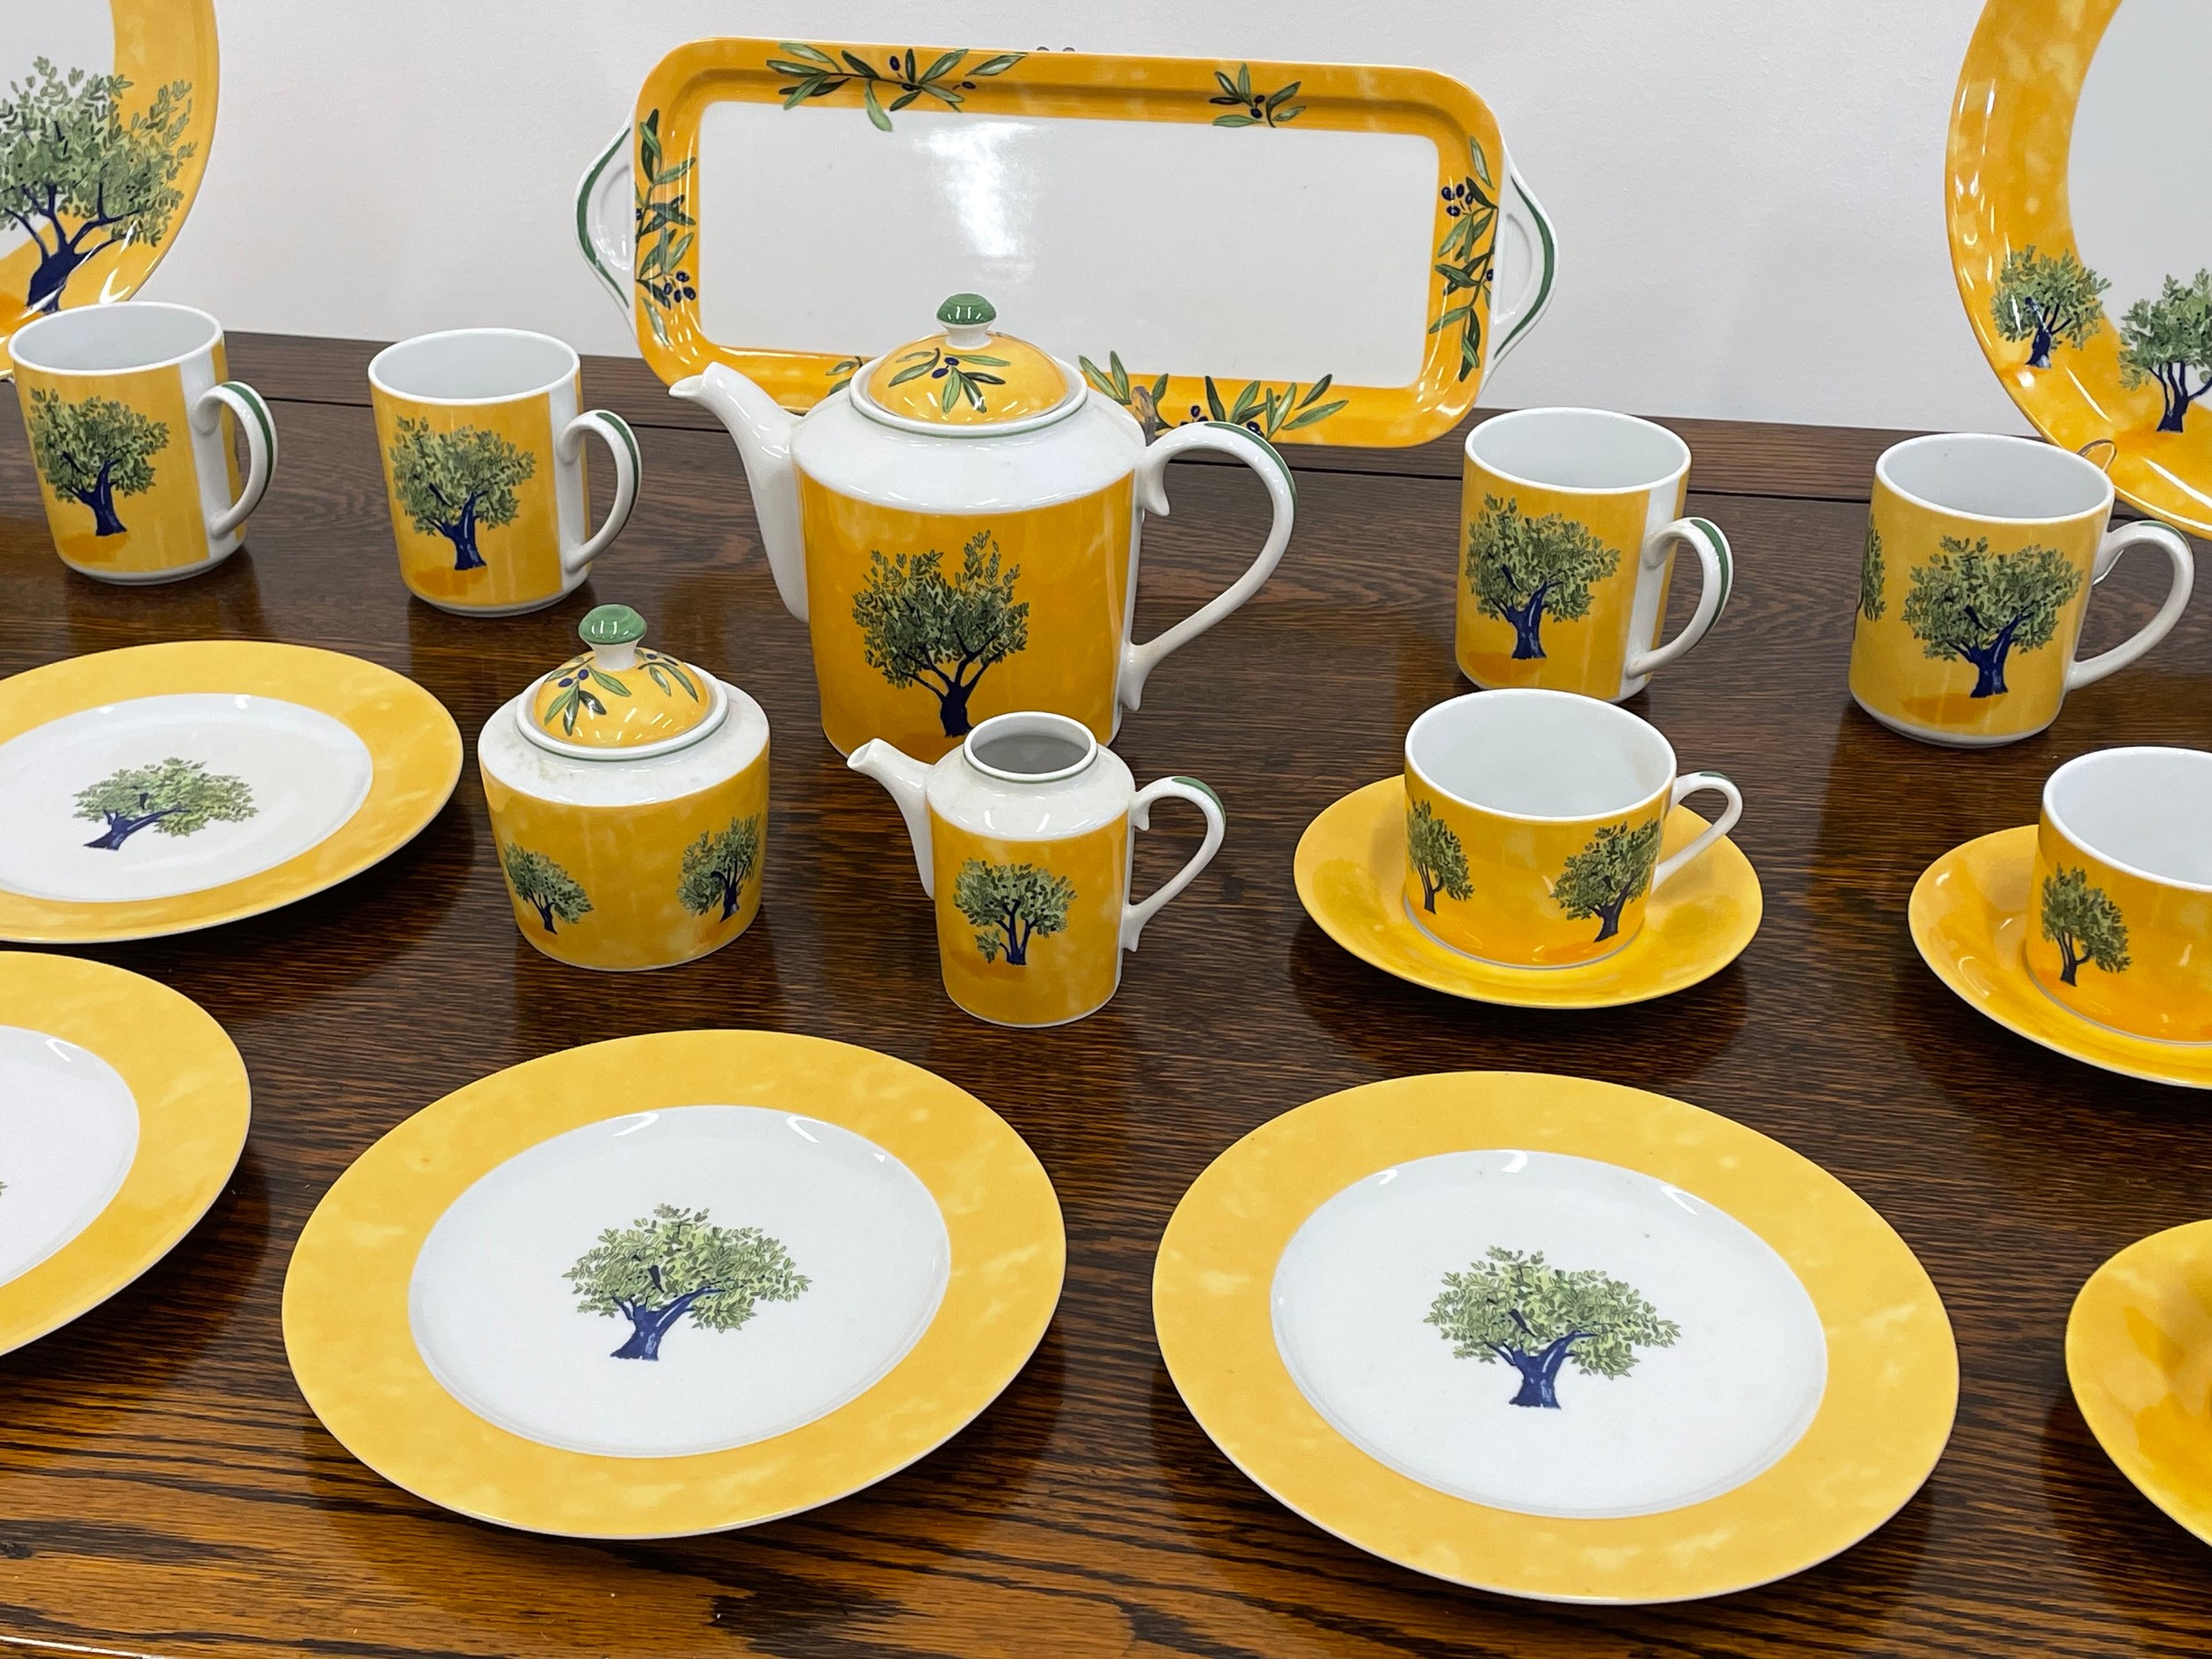 GUY DEGRENNE 'OULIVEIRO' EIGHT PLACE TEA SERVICE, including eight cups and saucers, eight mugs, - Image 9 of 10